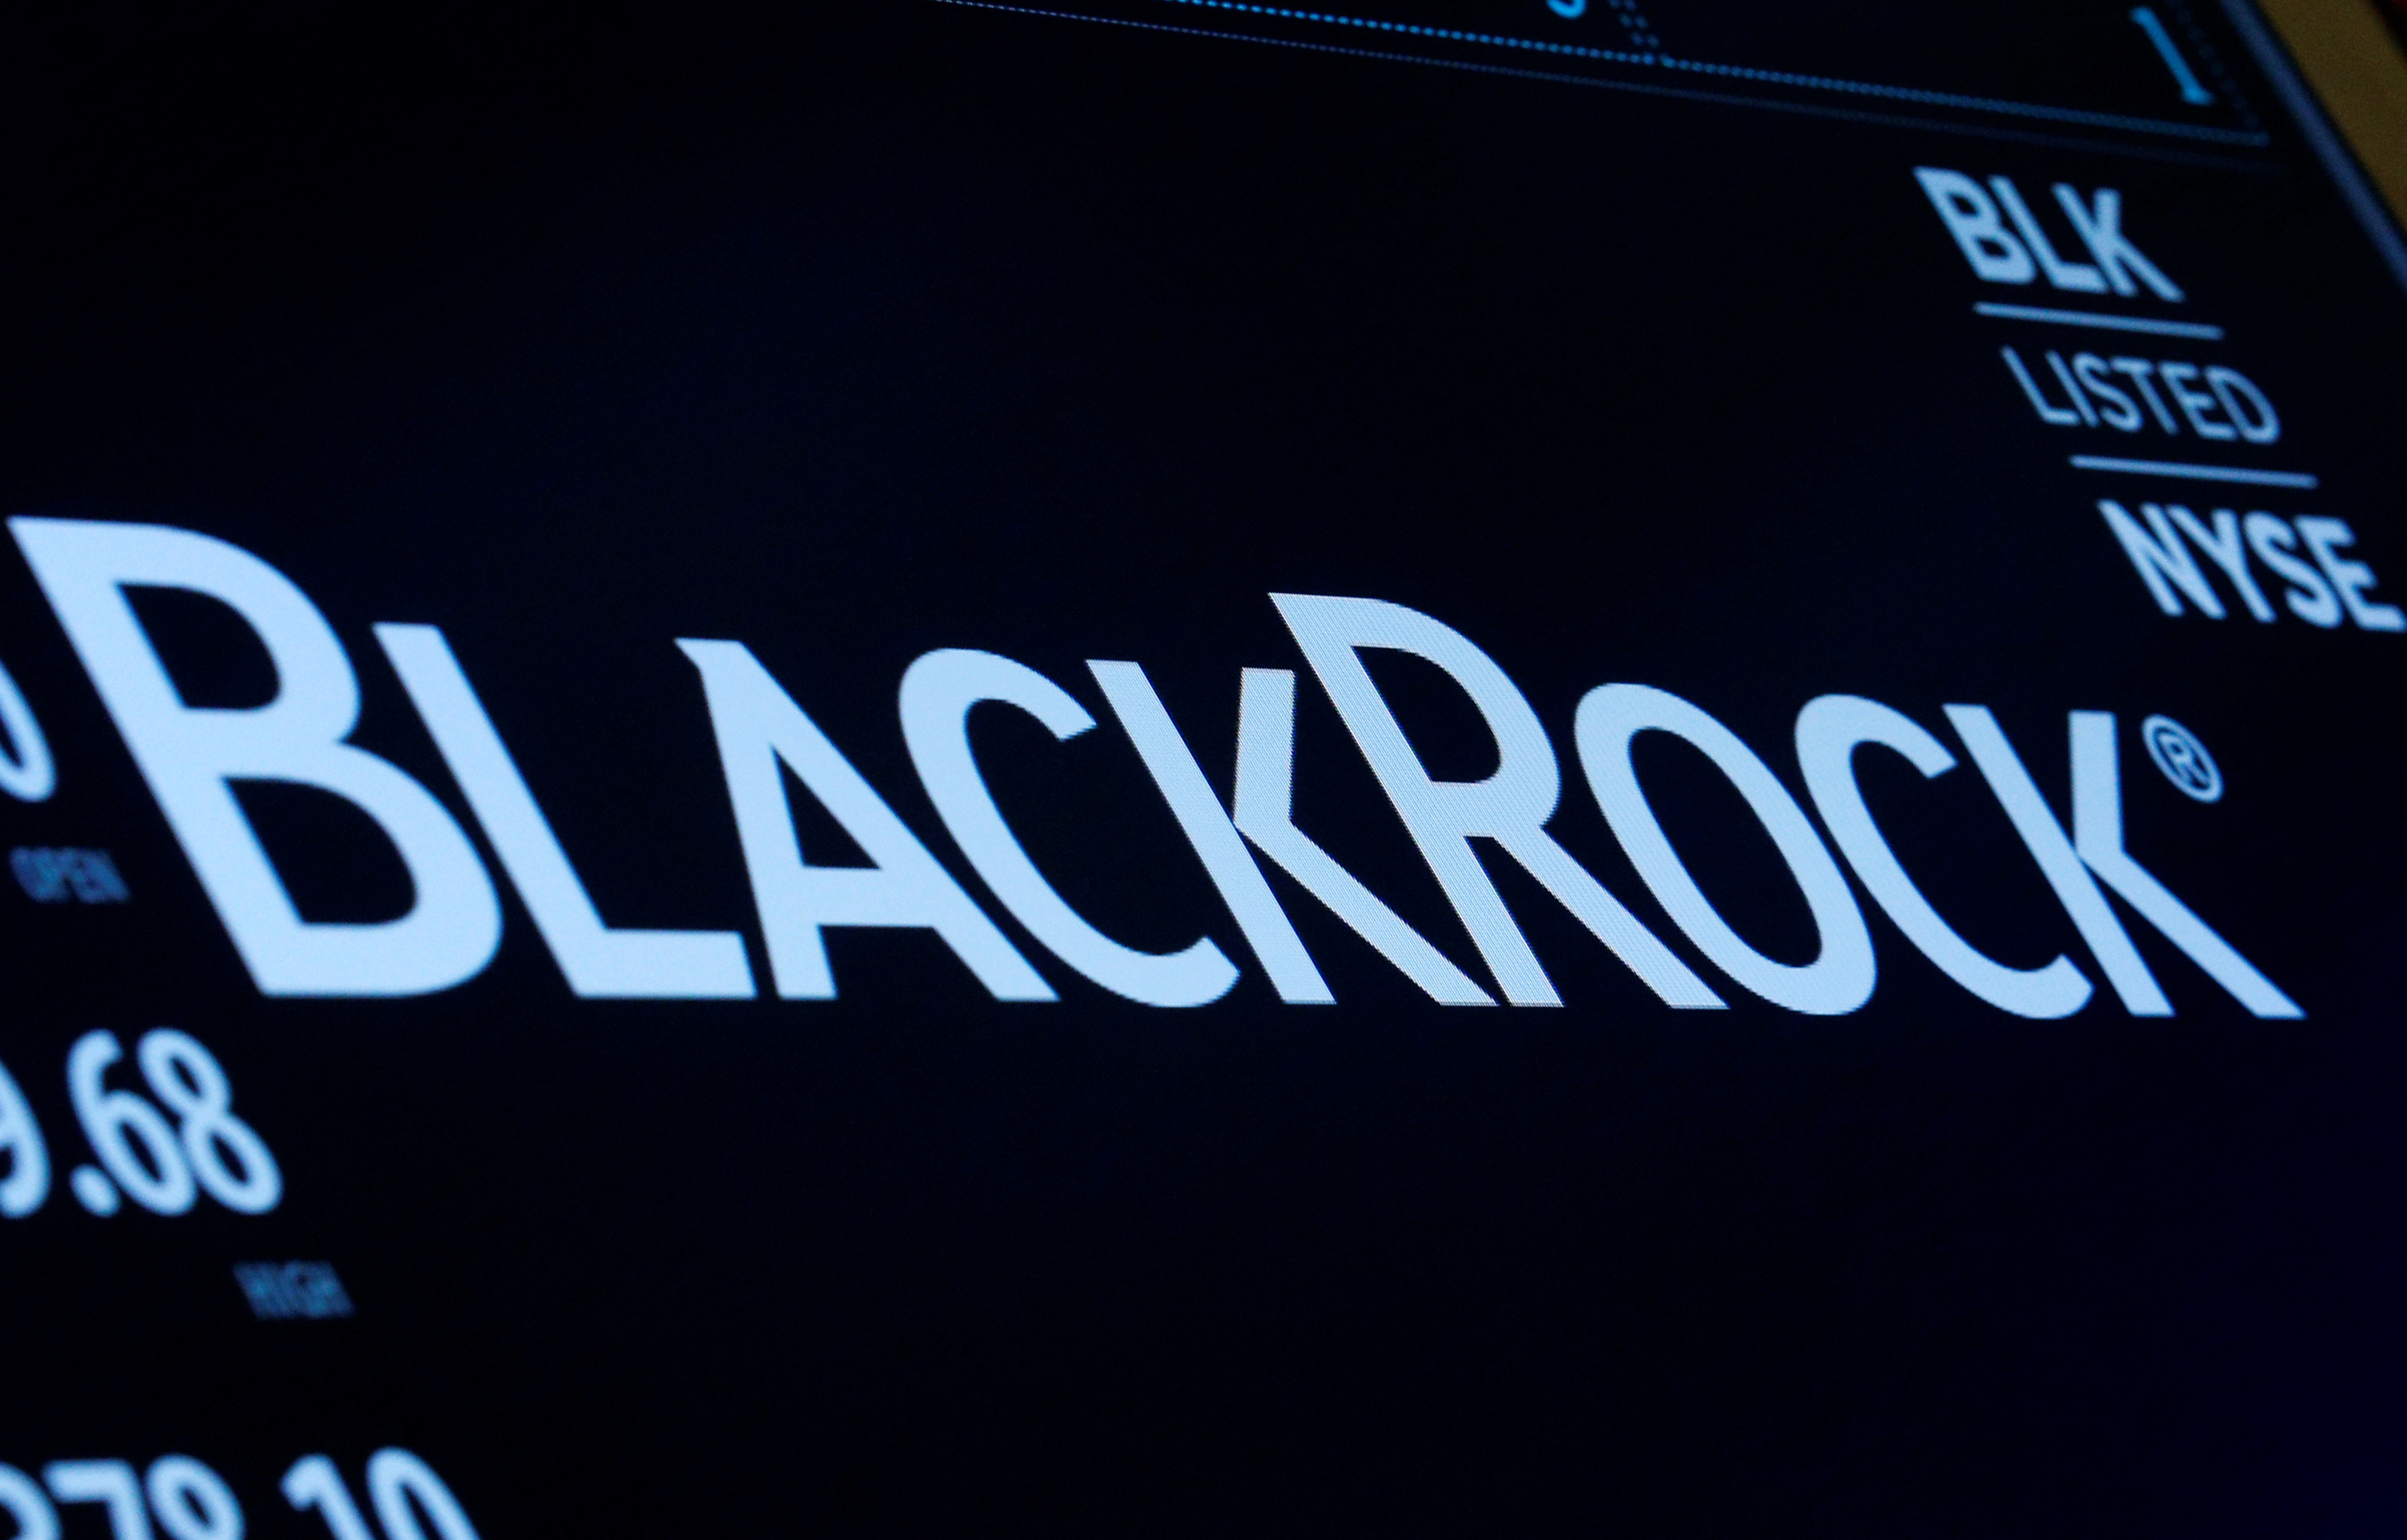 The company logo and trading information for BlackRock is displayed on a screen on the floor of the NYSE